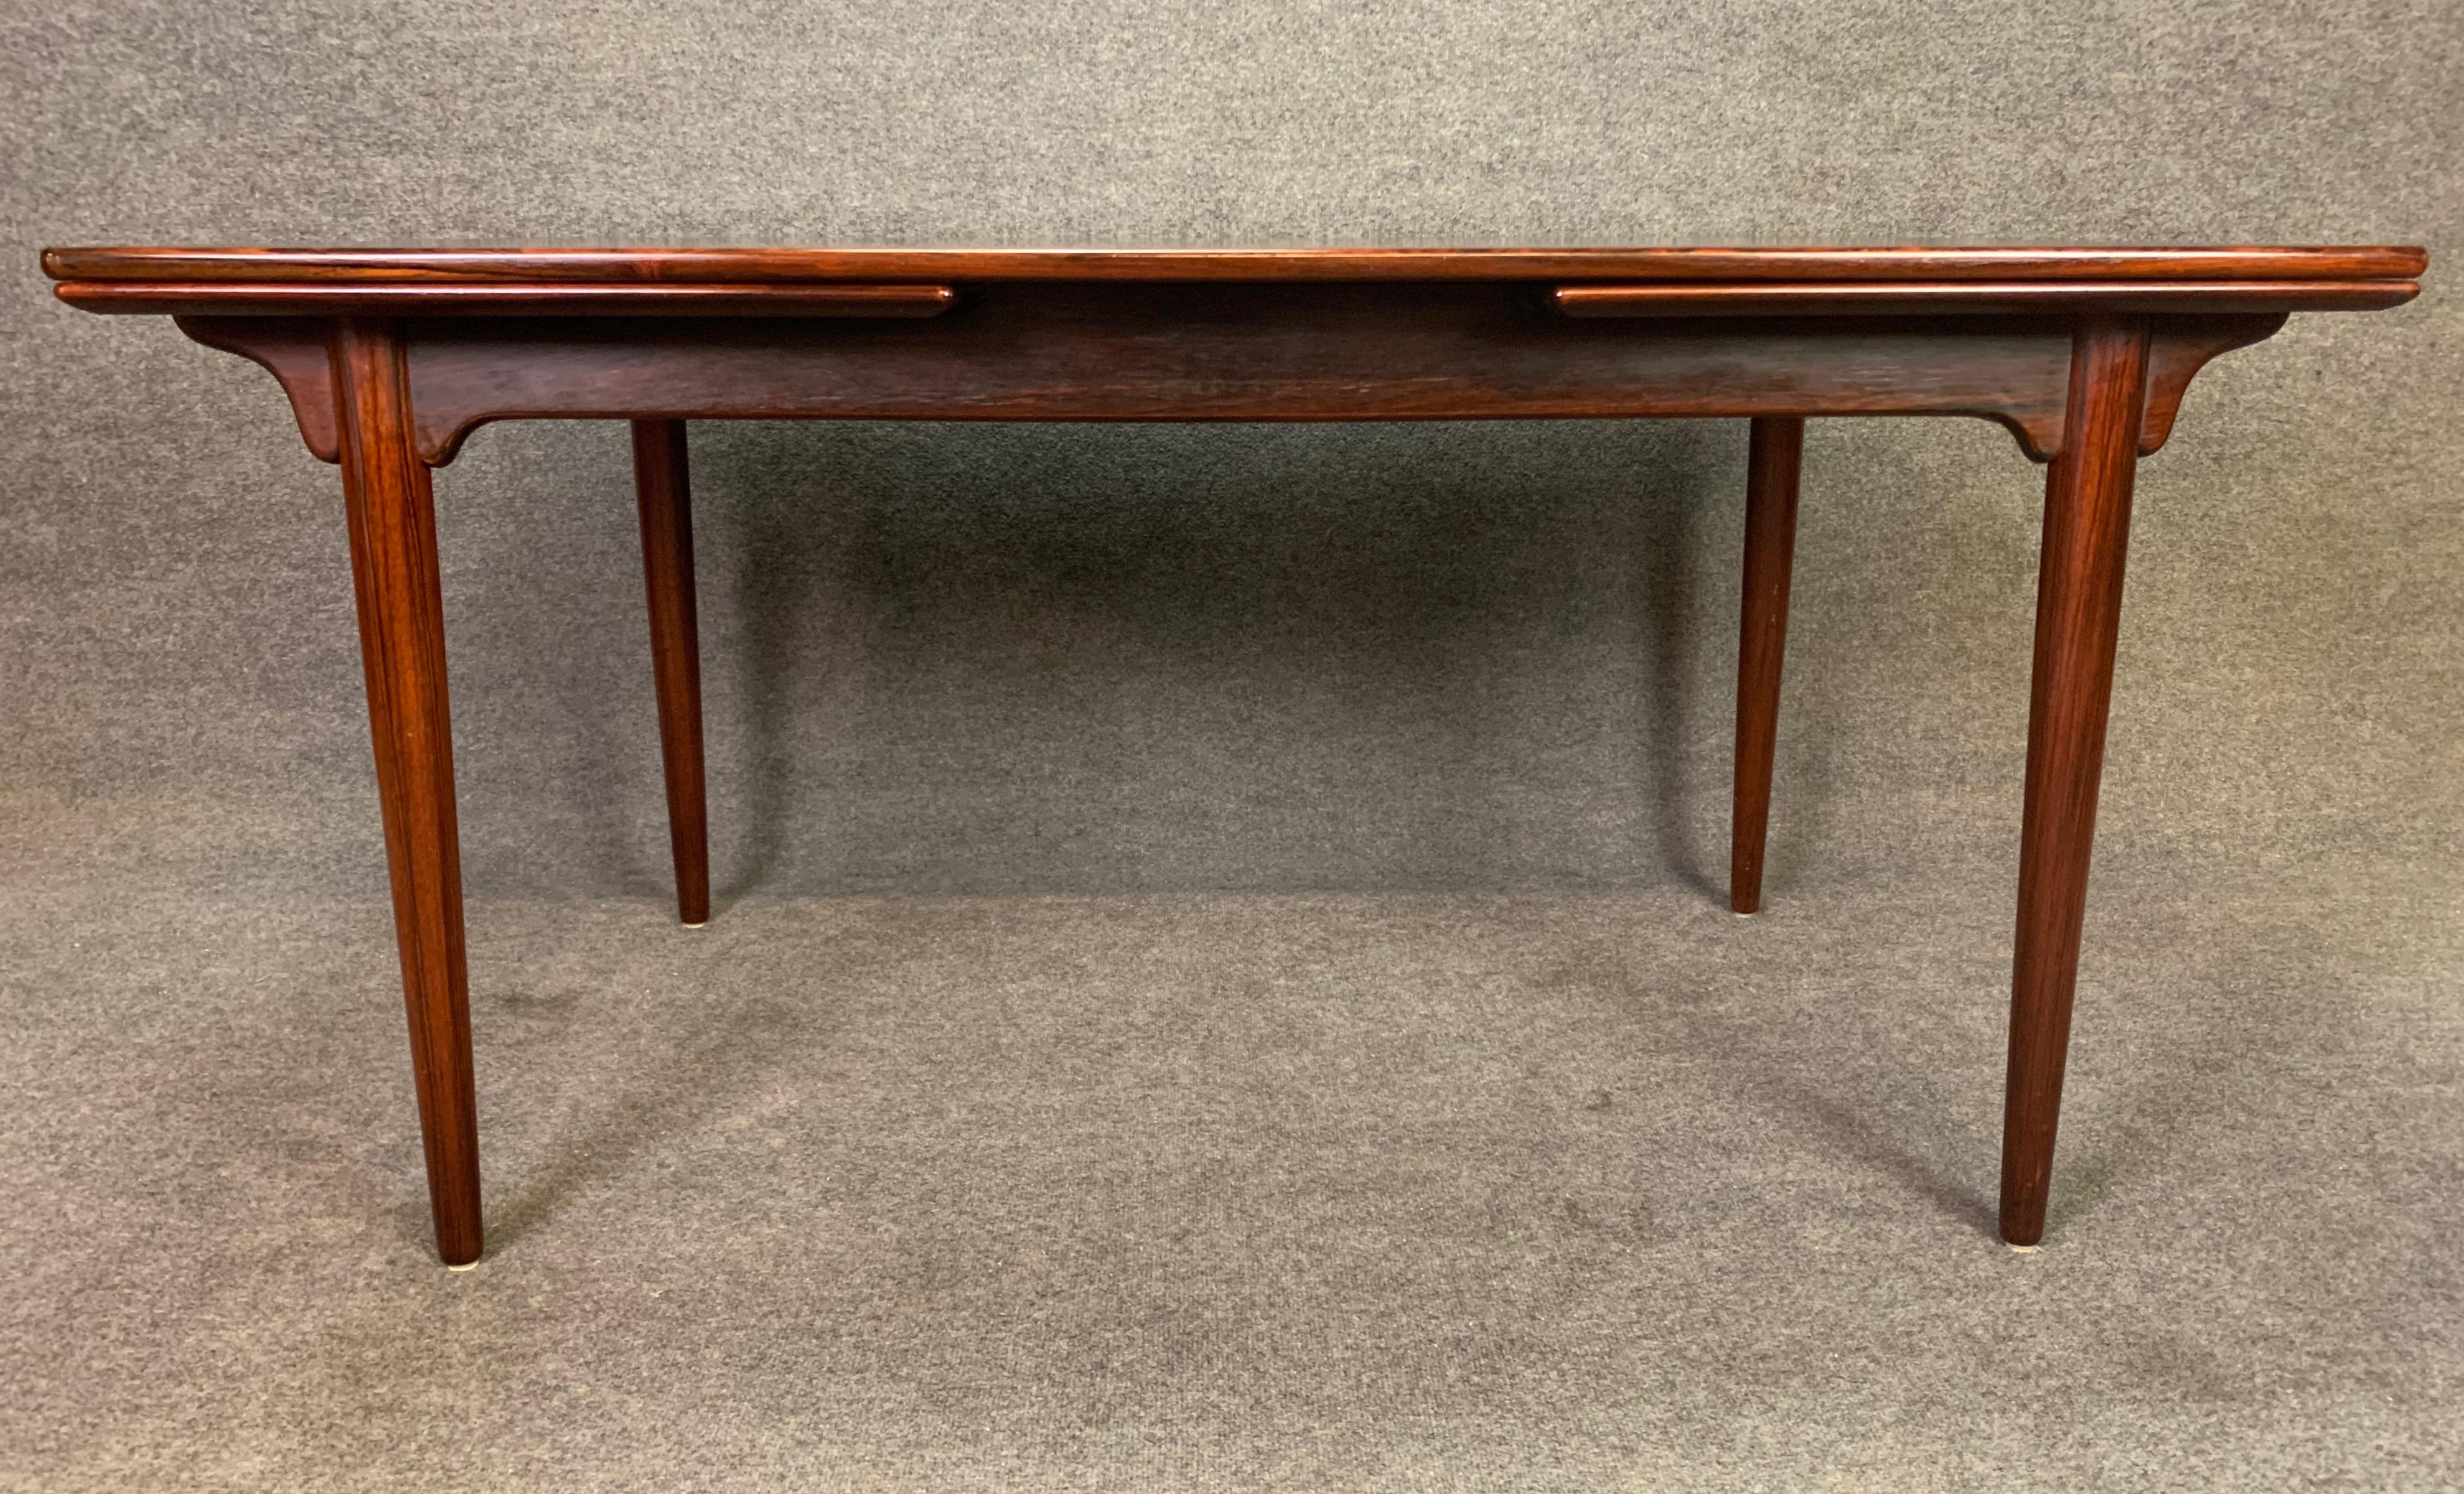 Here is a beautiful Scandinavian Modern dining table in rosewood designed by Gunni Omann and manufactured by Omann Jun in Denmark in the 1960s.
This exquisite table features a vibrant wood grain, a sculptural frame, two draw leaves and four solid